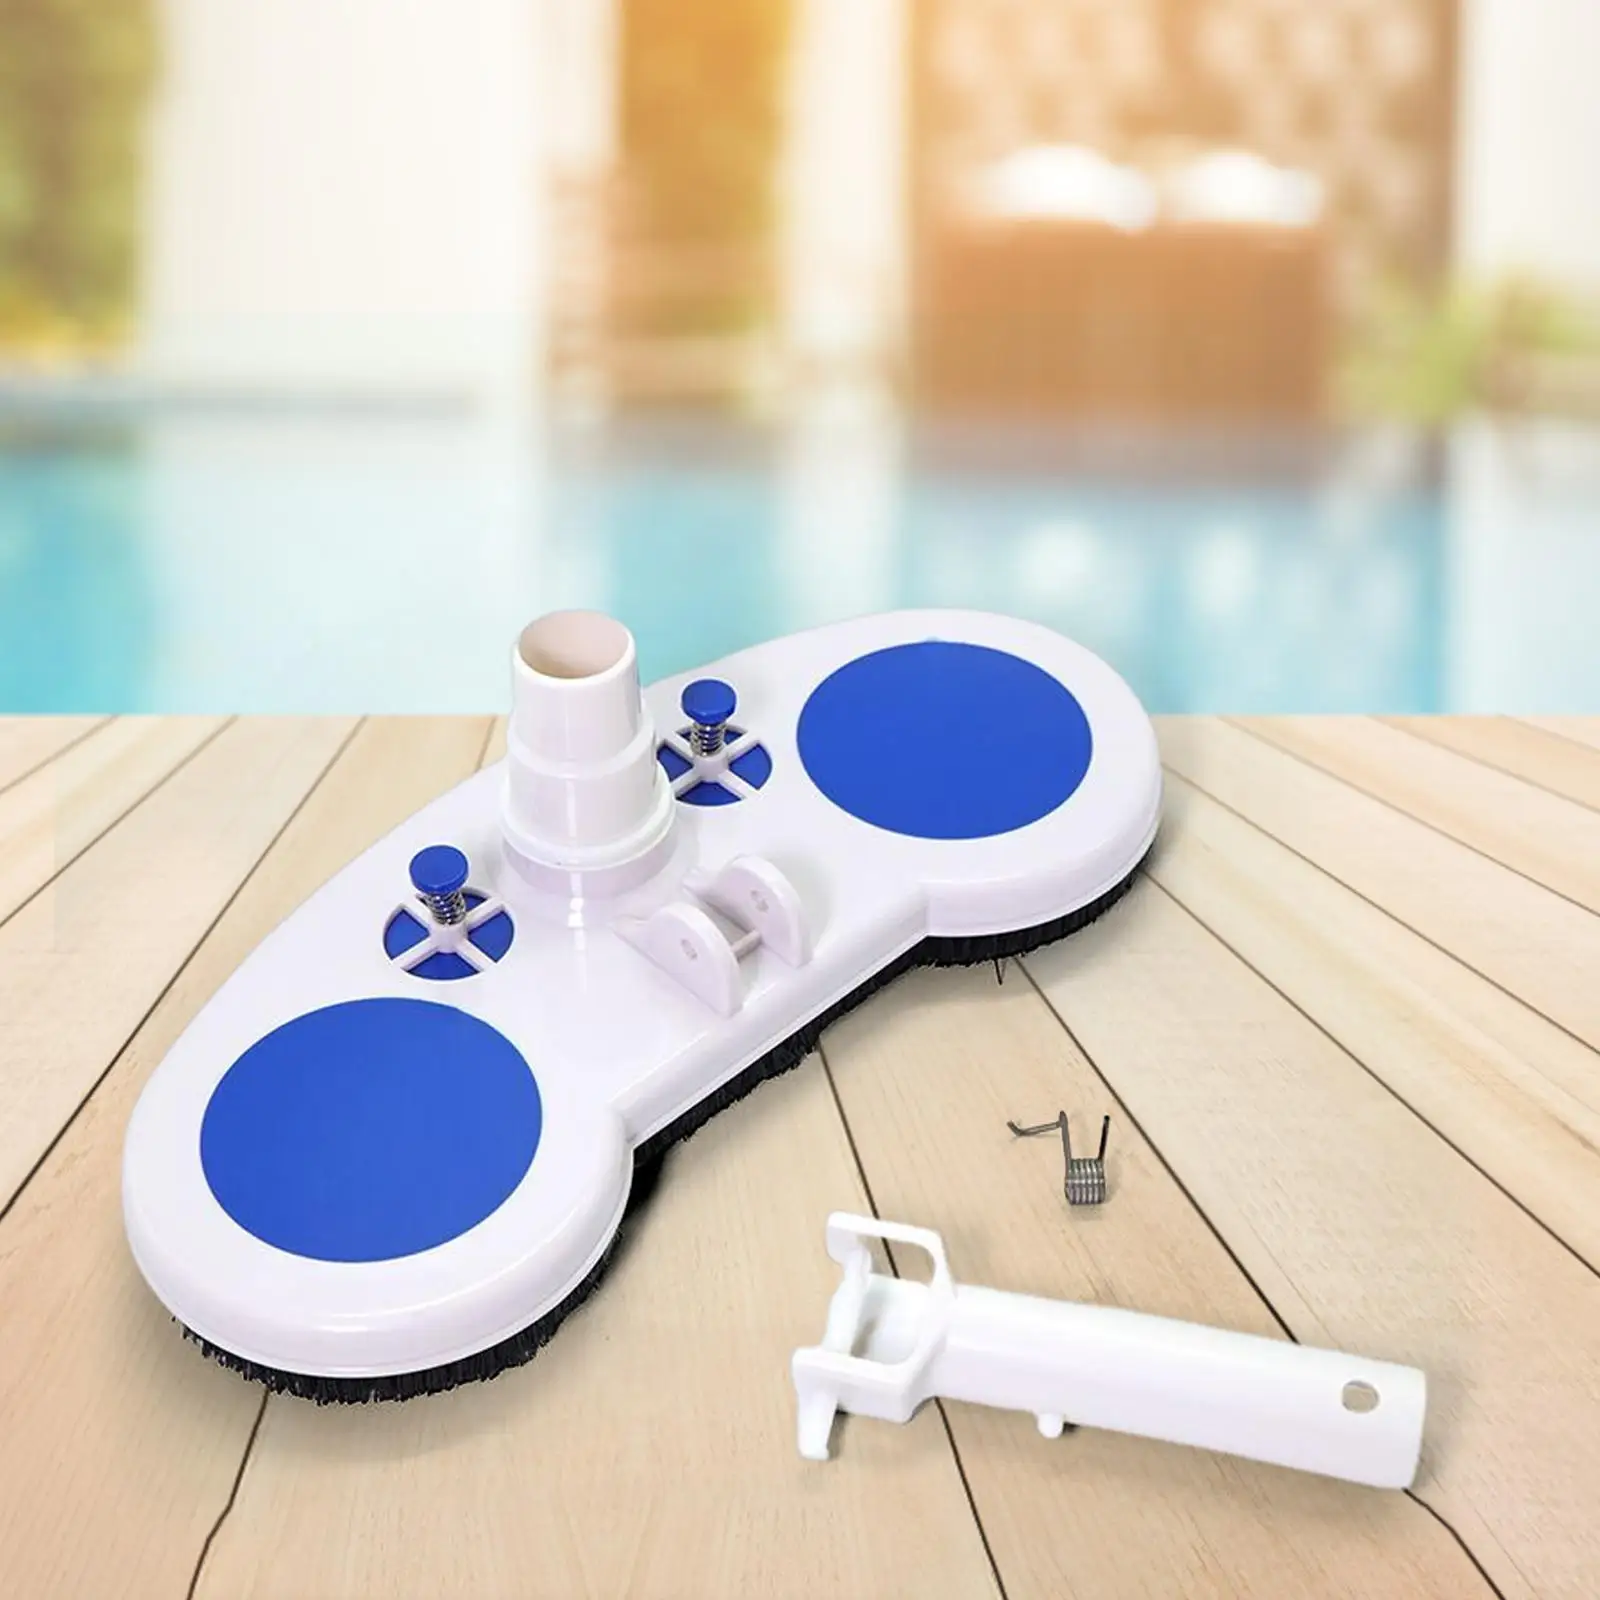 Pool Cleaning Suction Head Underwater Pool Cleaner for SPA Accessories